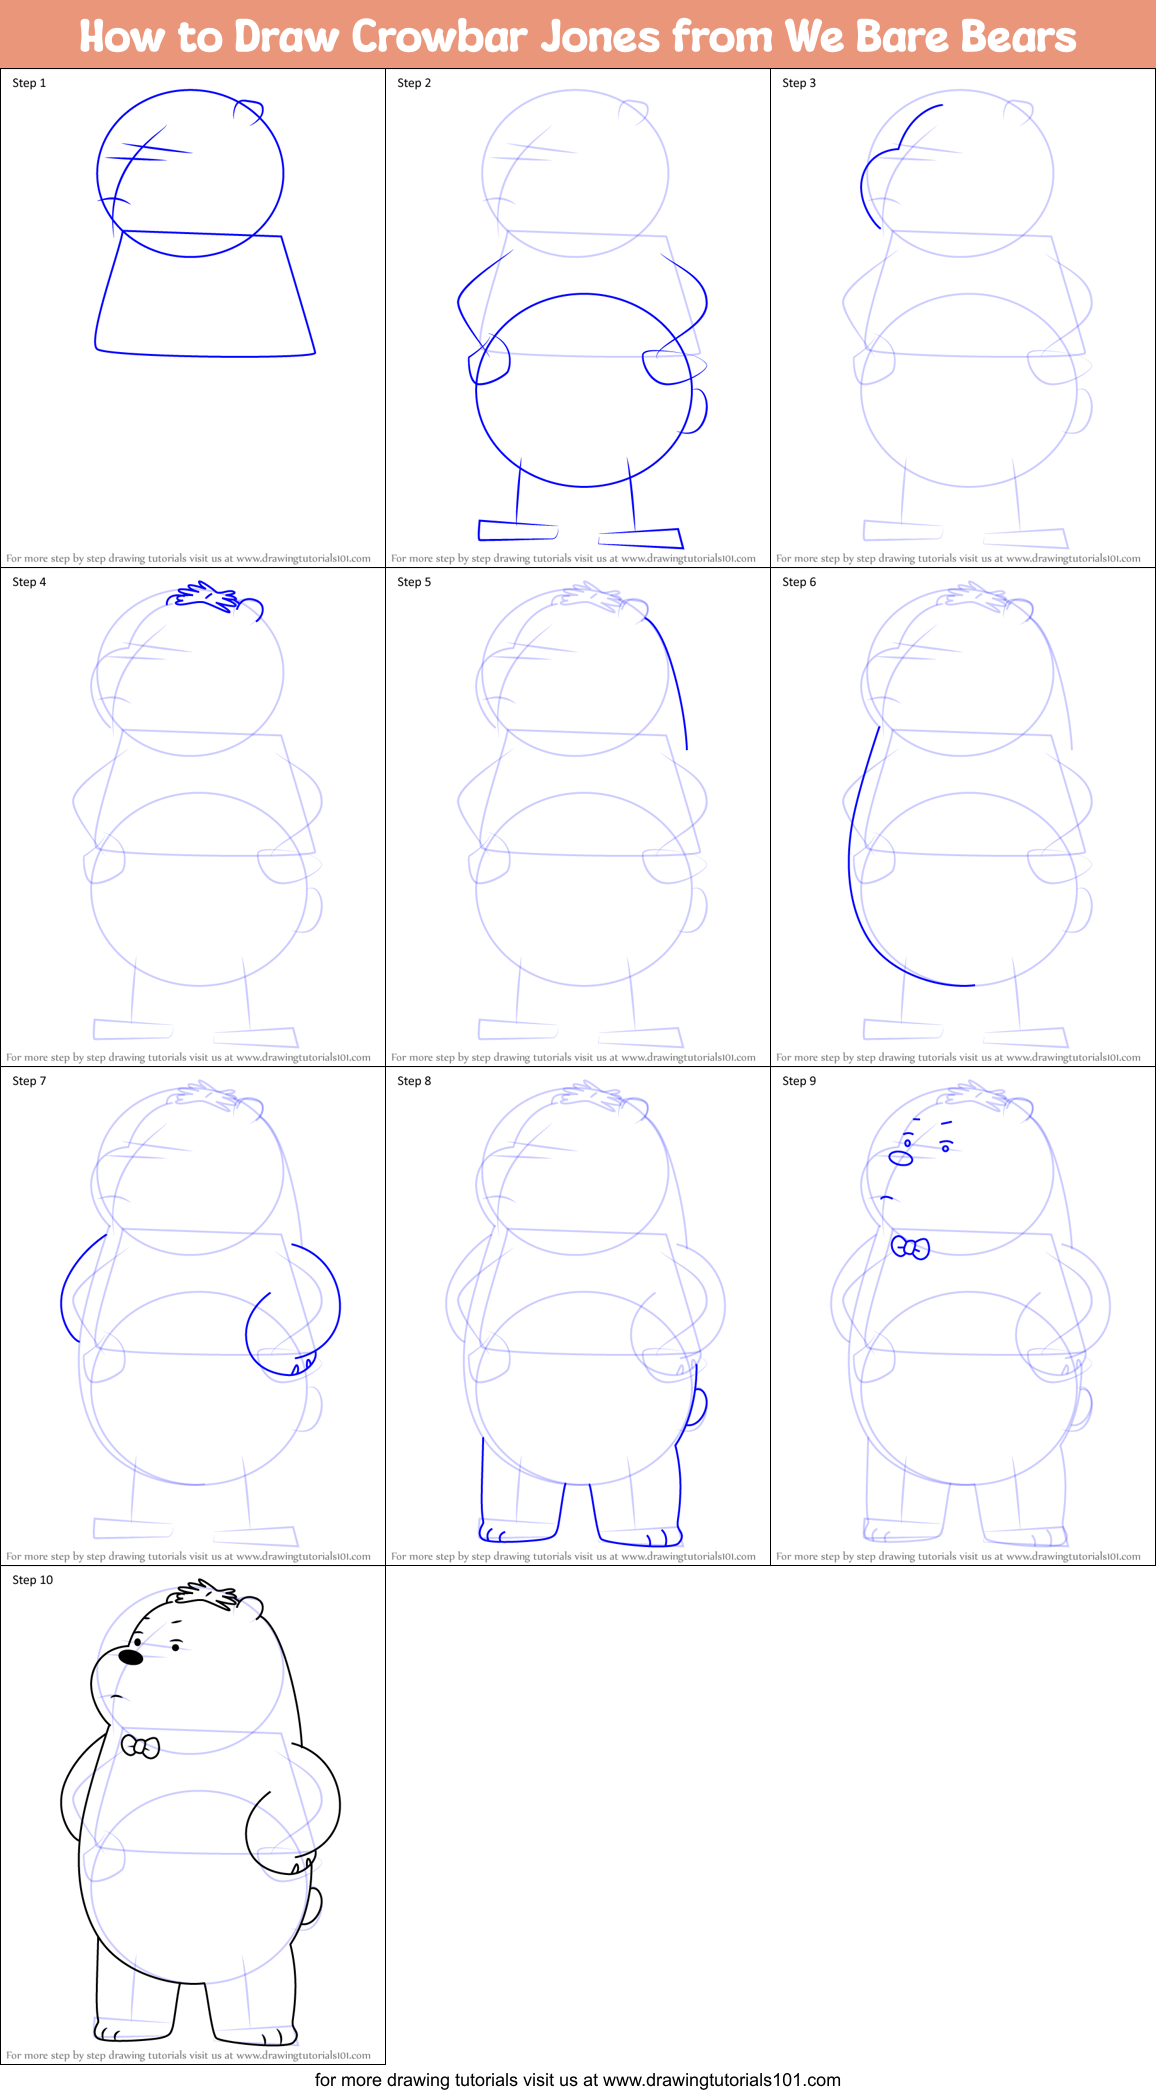 How To Draw Crowbar Jones From We Bare Bears Printable Step By Step Drawing Sheet Drawingtutorials101 Com - crow bar roblox